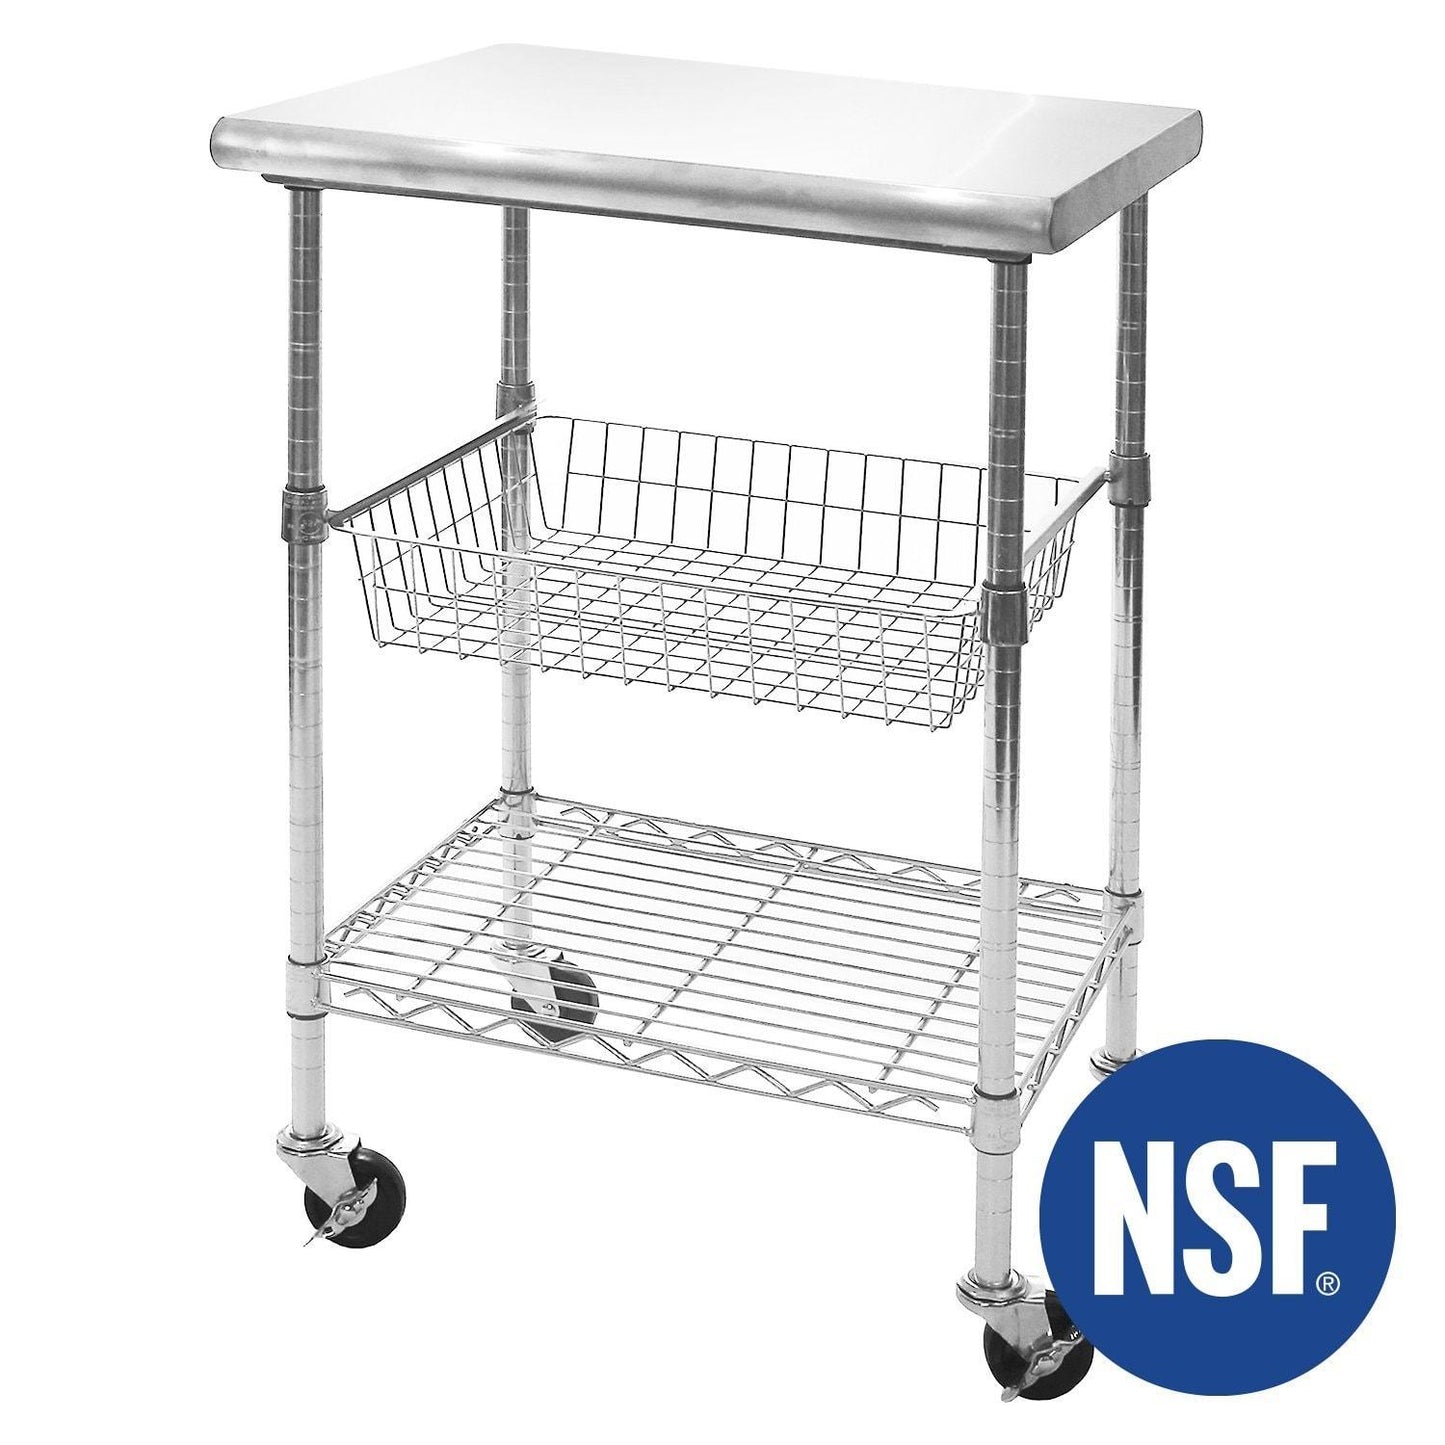 Online shopping seville classics stainless steel nsf certified professional kitchen work table cart 24 w x 20 d x 36 h